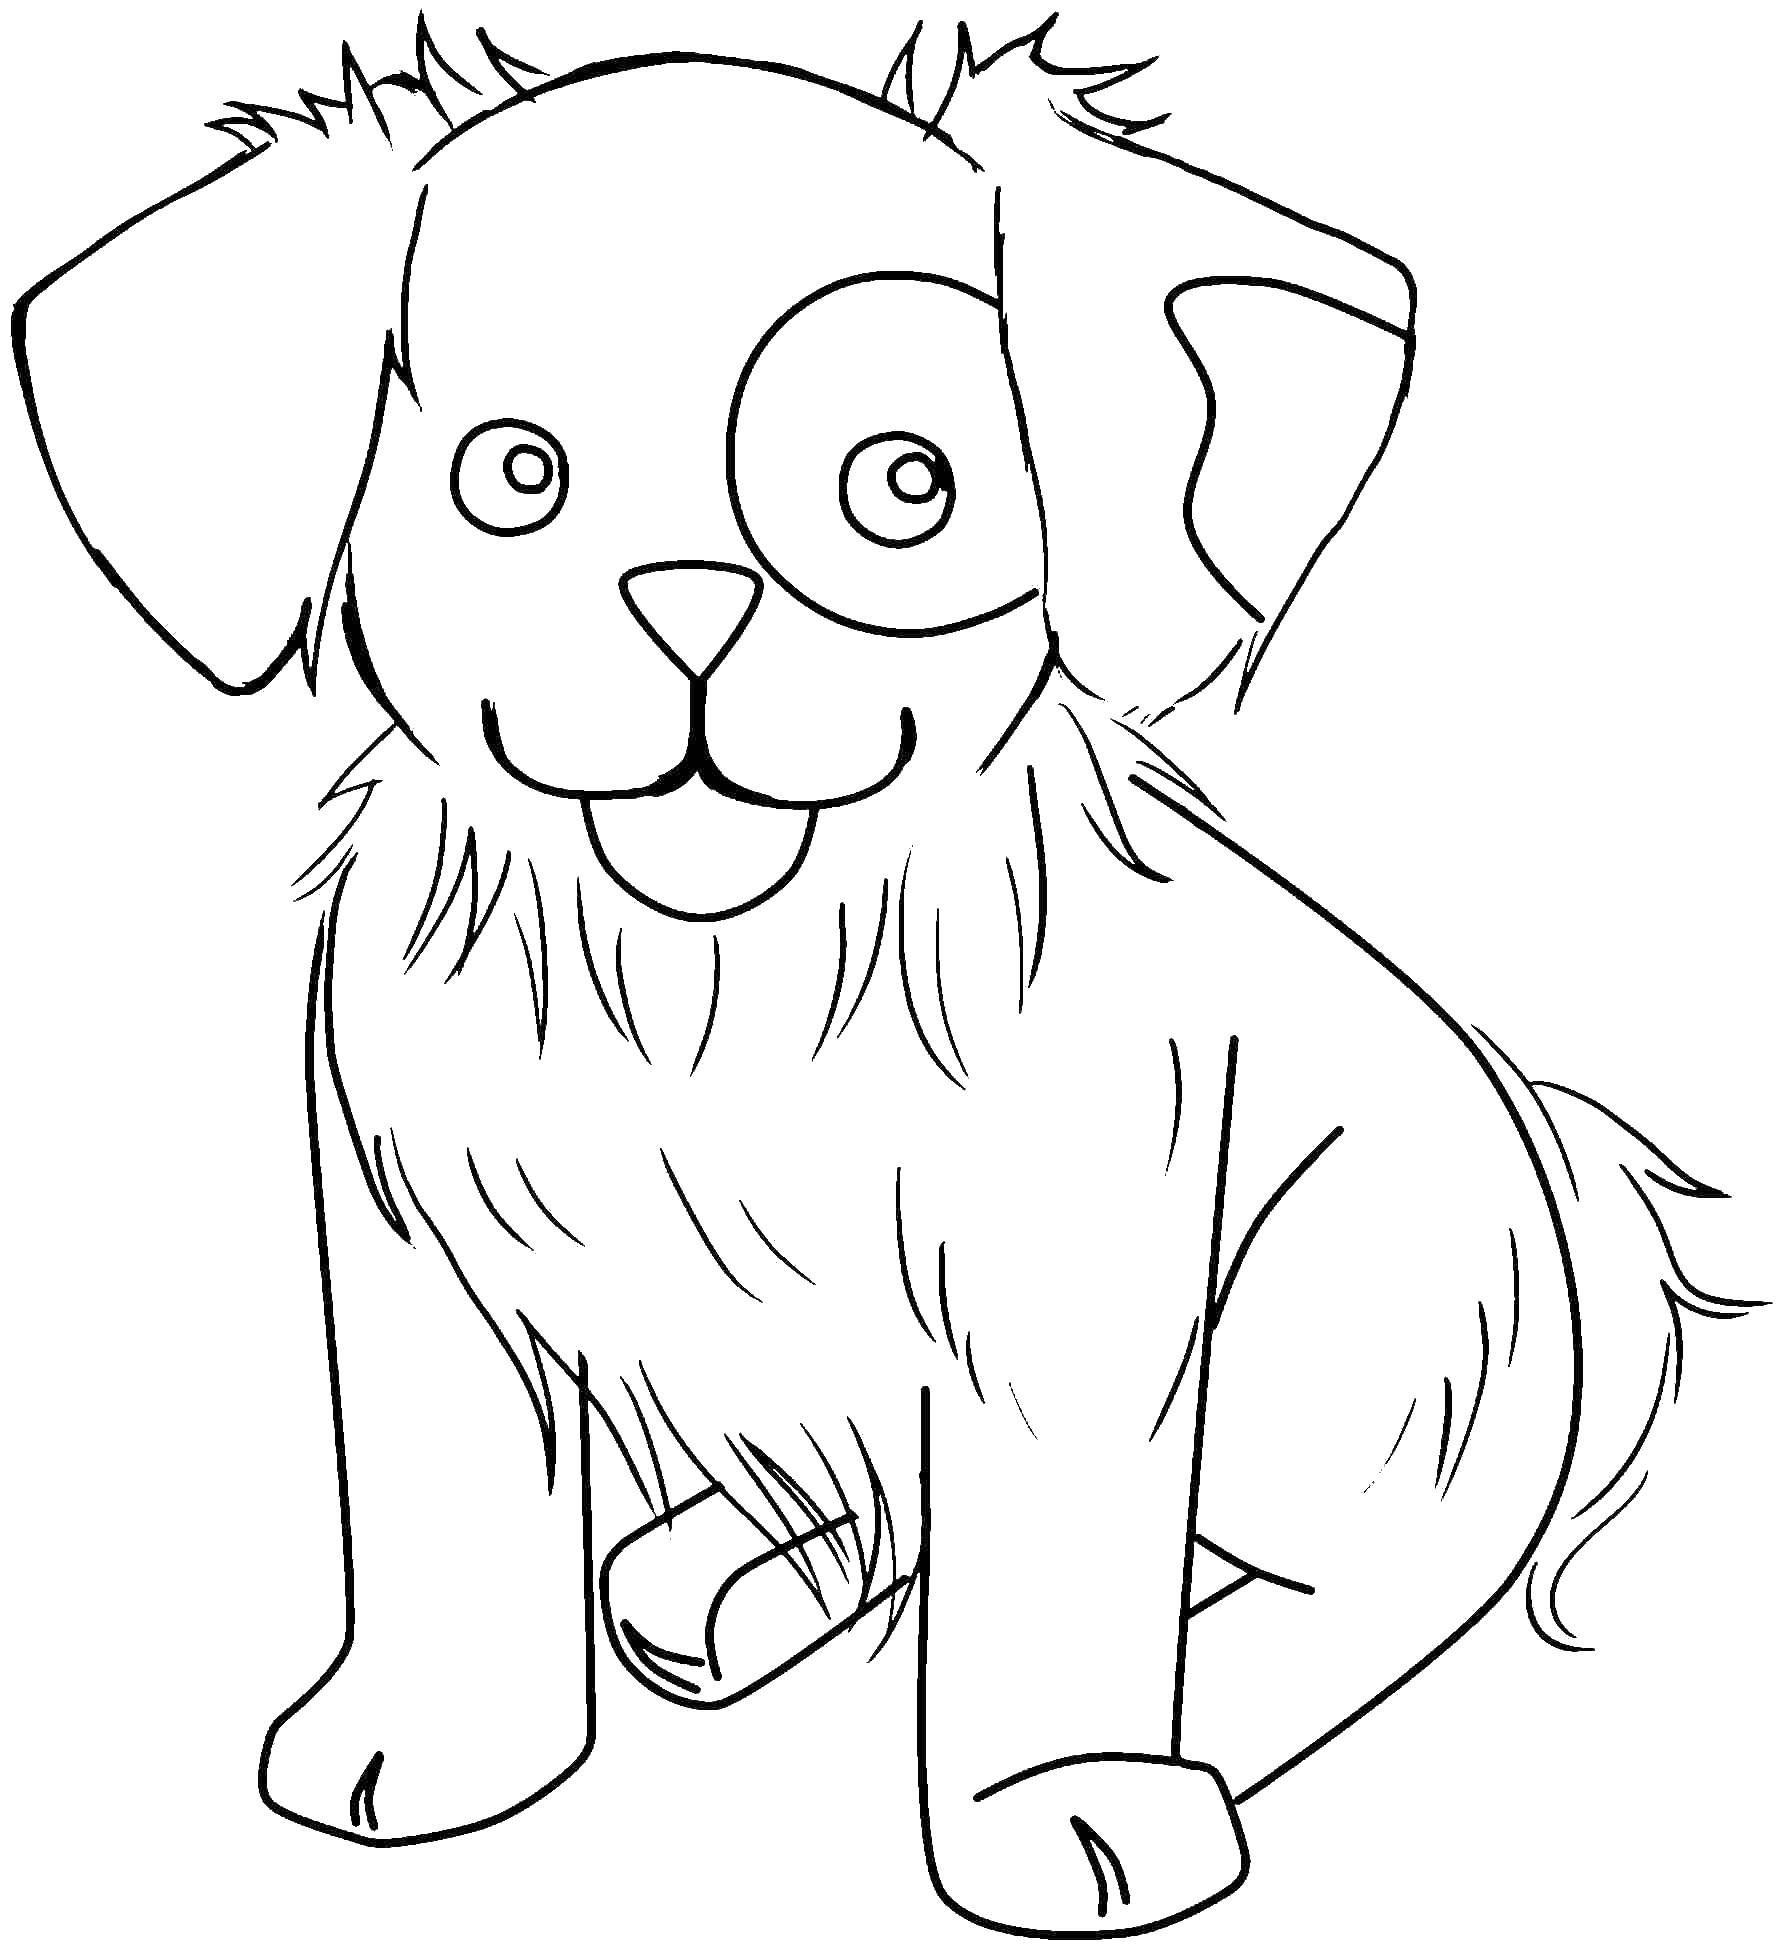 Coloring Puppy. Category animals. Tags:  animals, dog, puppy, dog.